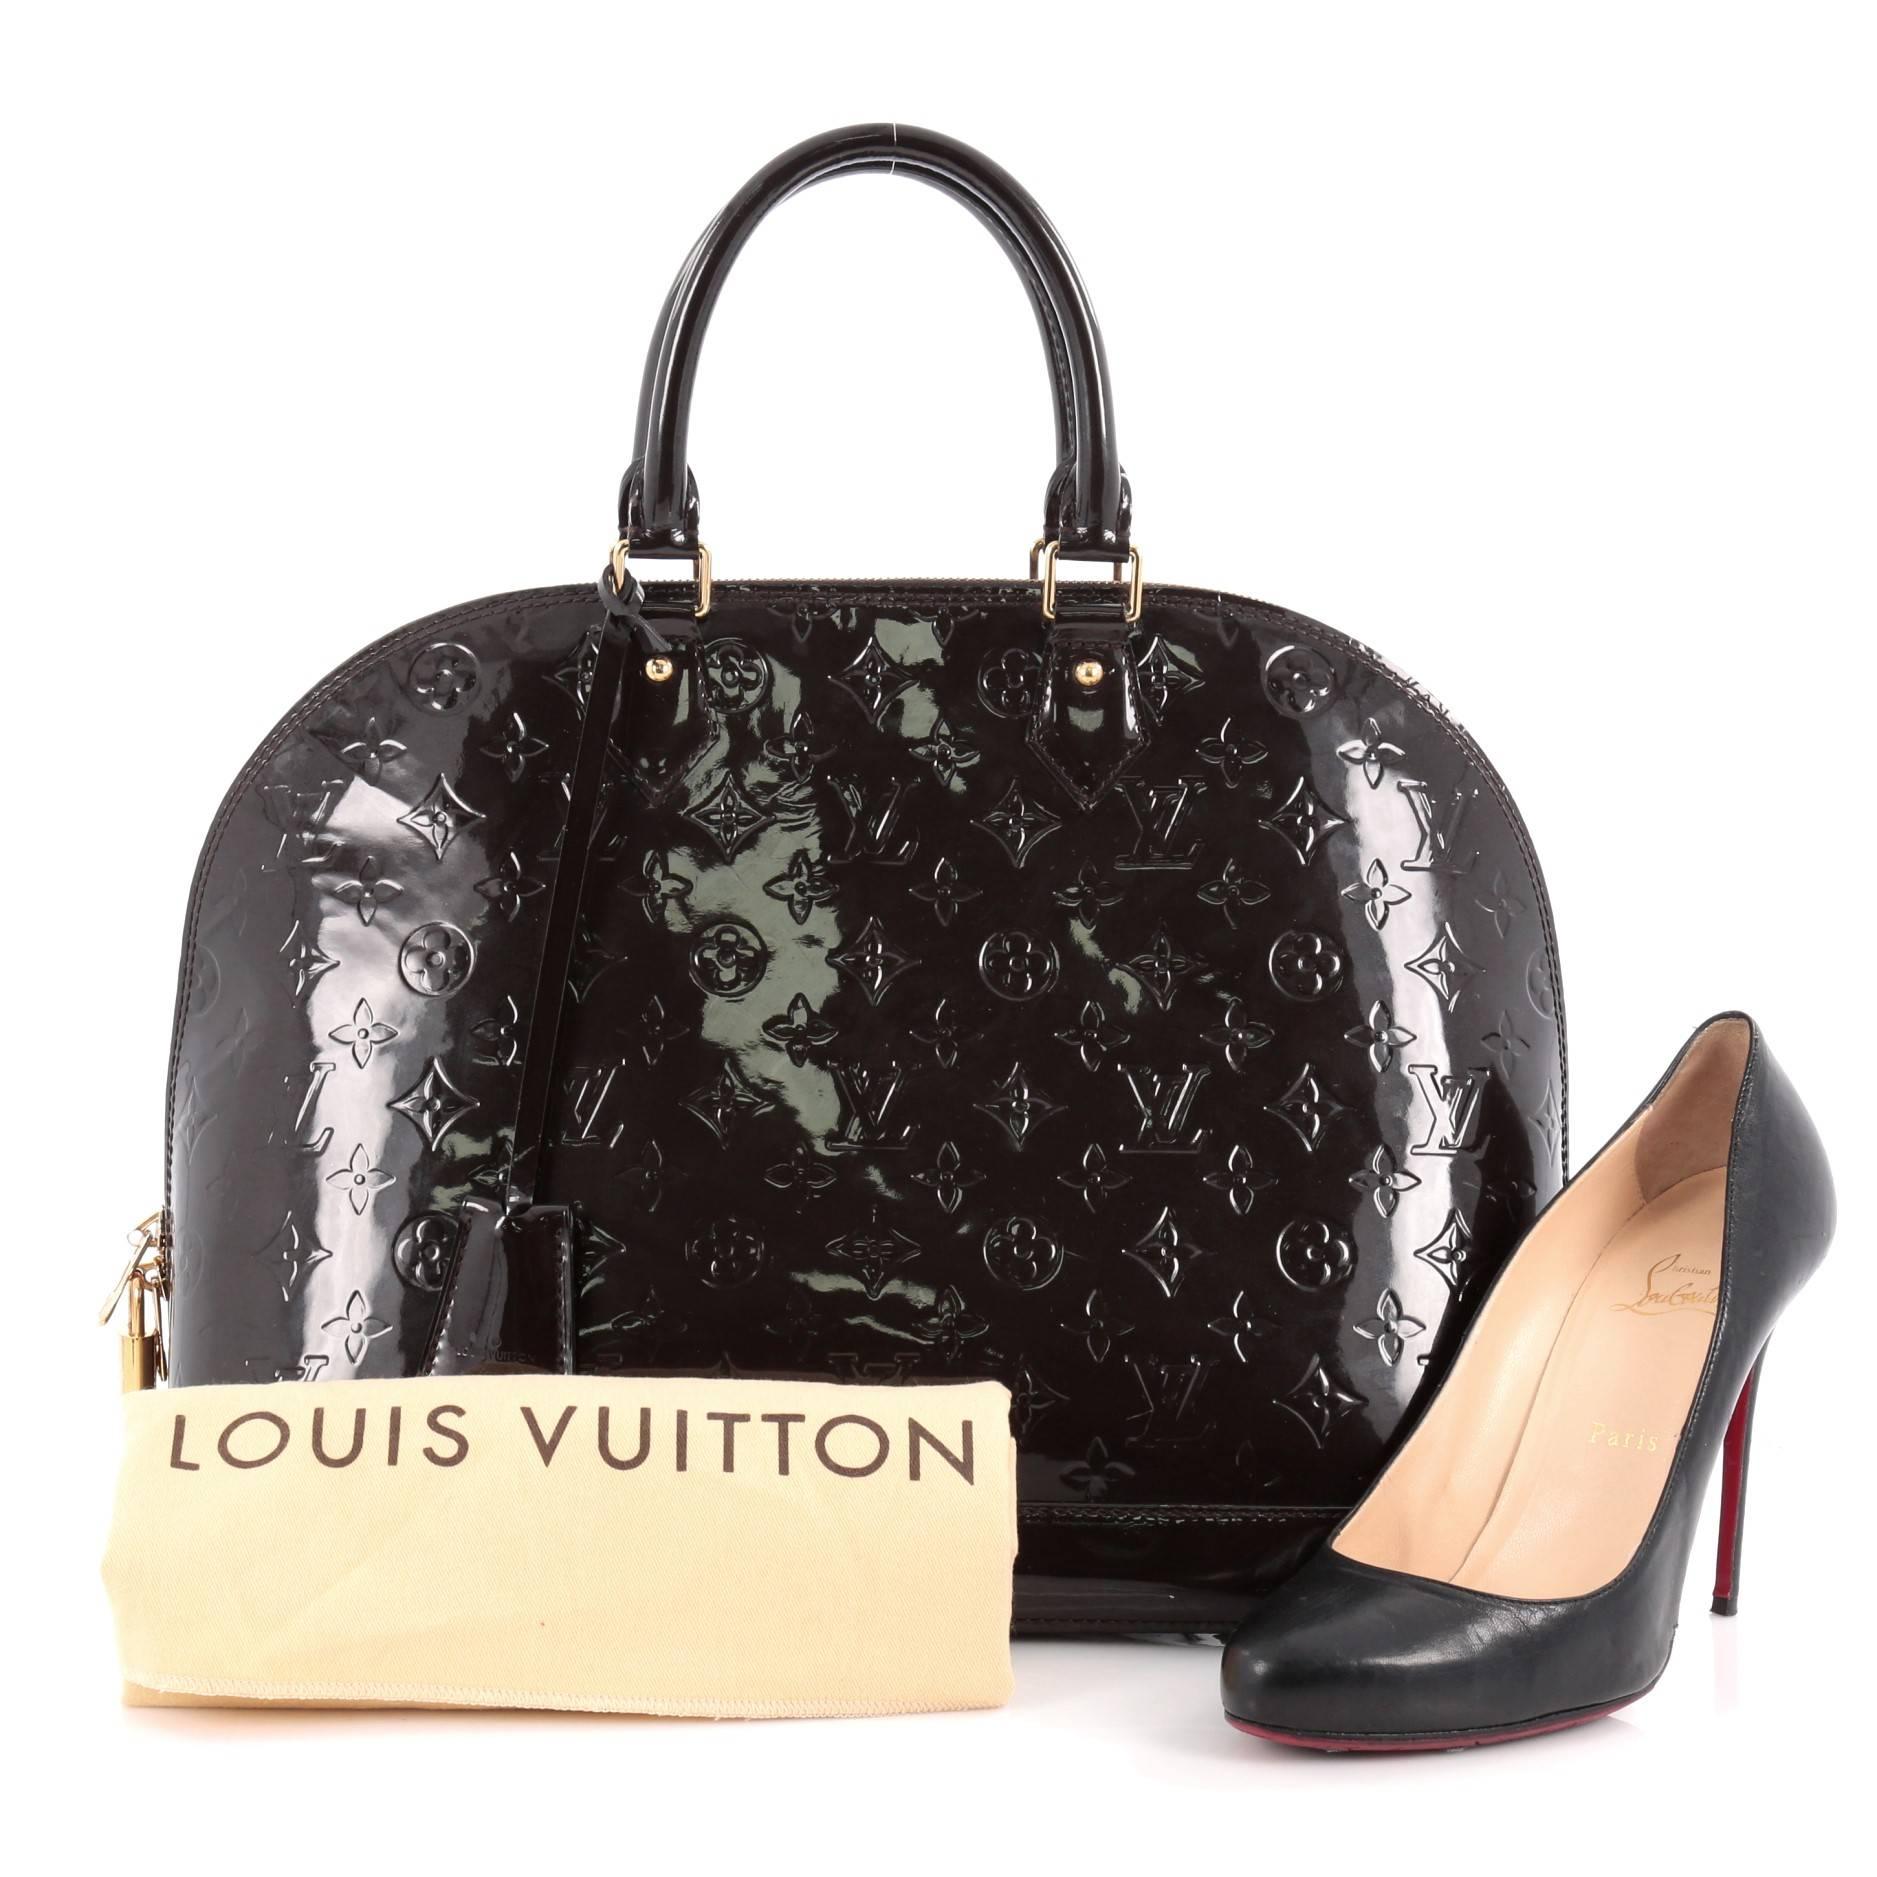 This authentic Louis Vuitton Alma Handbag Monogram Vernis GM is a fresh and elegant spin on a classic style that is perfect for all seasons. Crafted from Louis Vuitton's dark brown monogram vernis, this dome-shaped satchel features double rolled